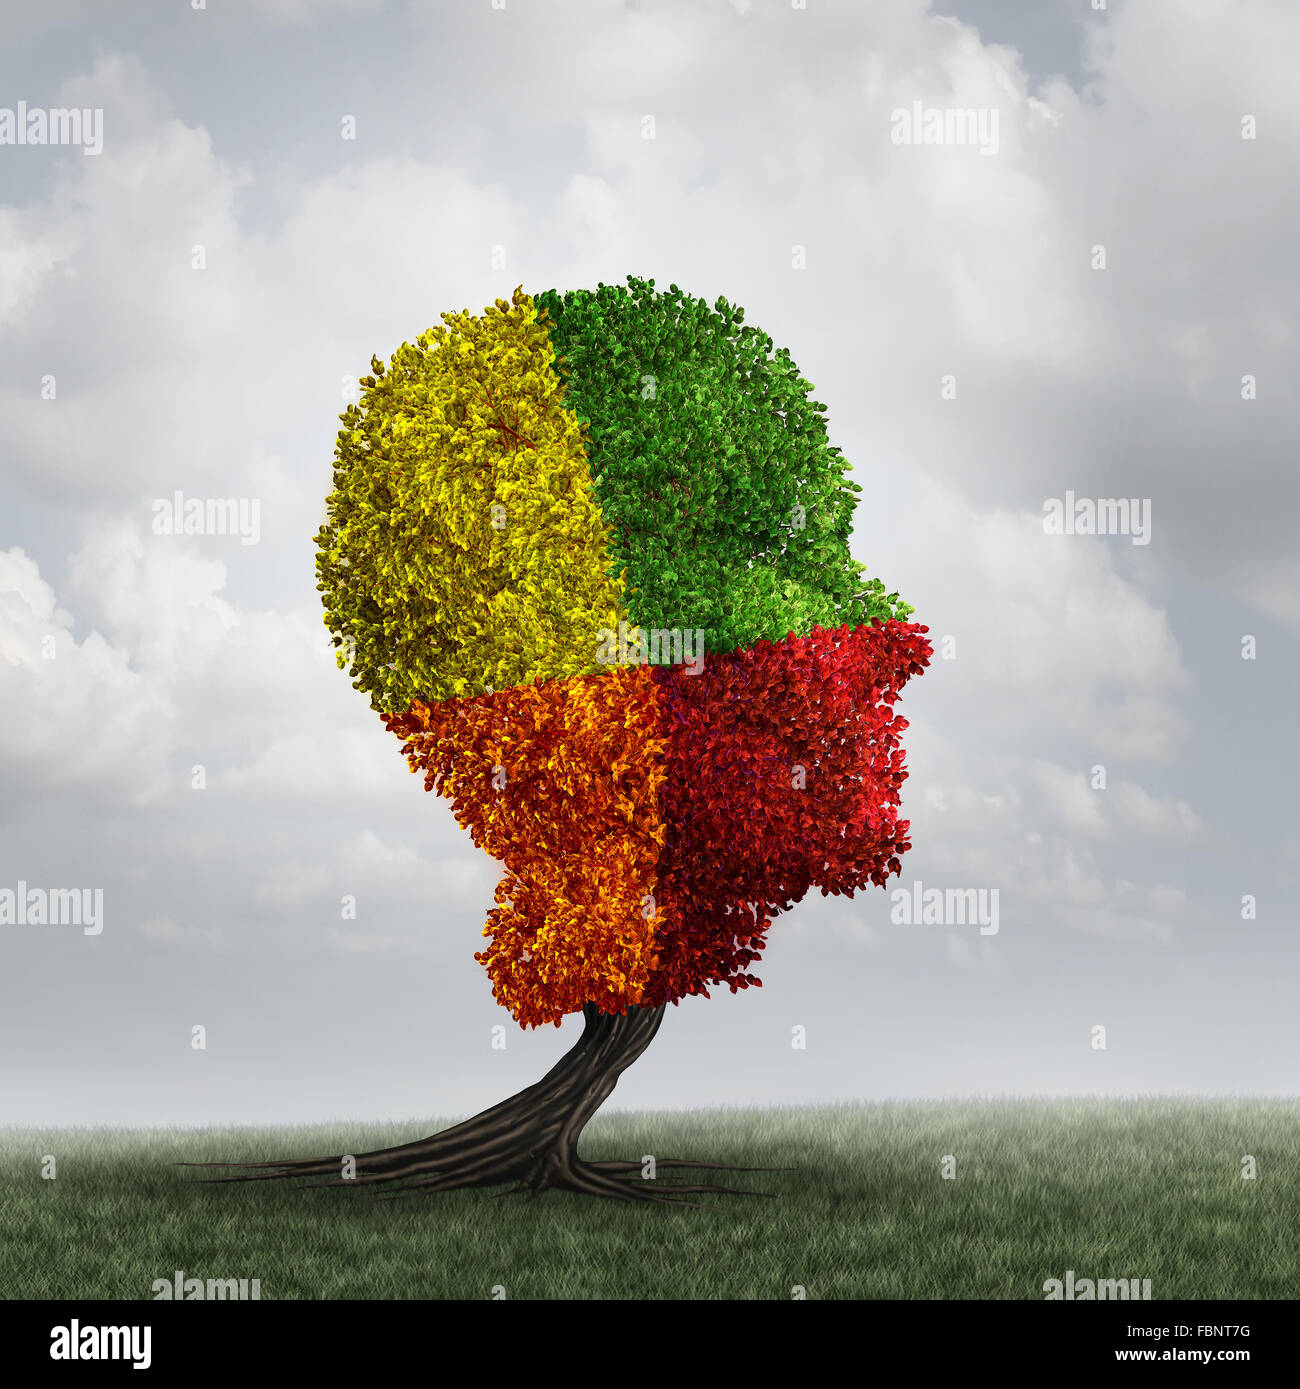 Human mood psychology change as a human head tree with changing leaf color as a mental health metaphor for brain thinking disorder and neurology chemistry imbalance or personality changes symbol. Stock Photo